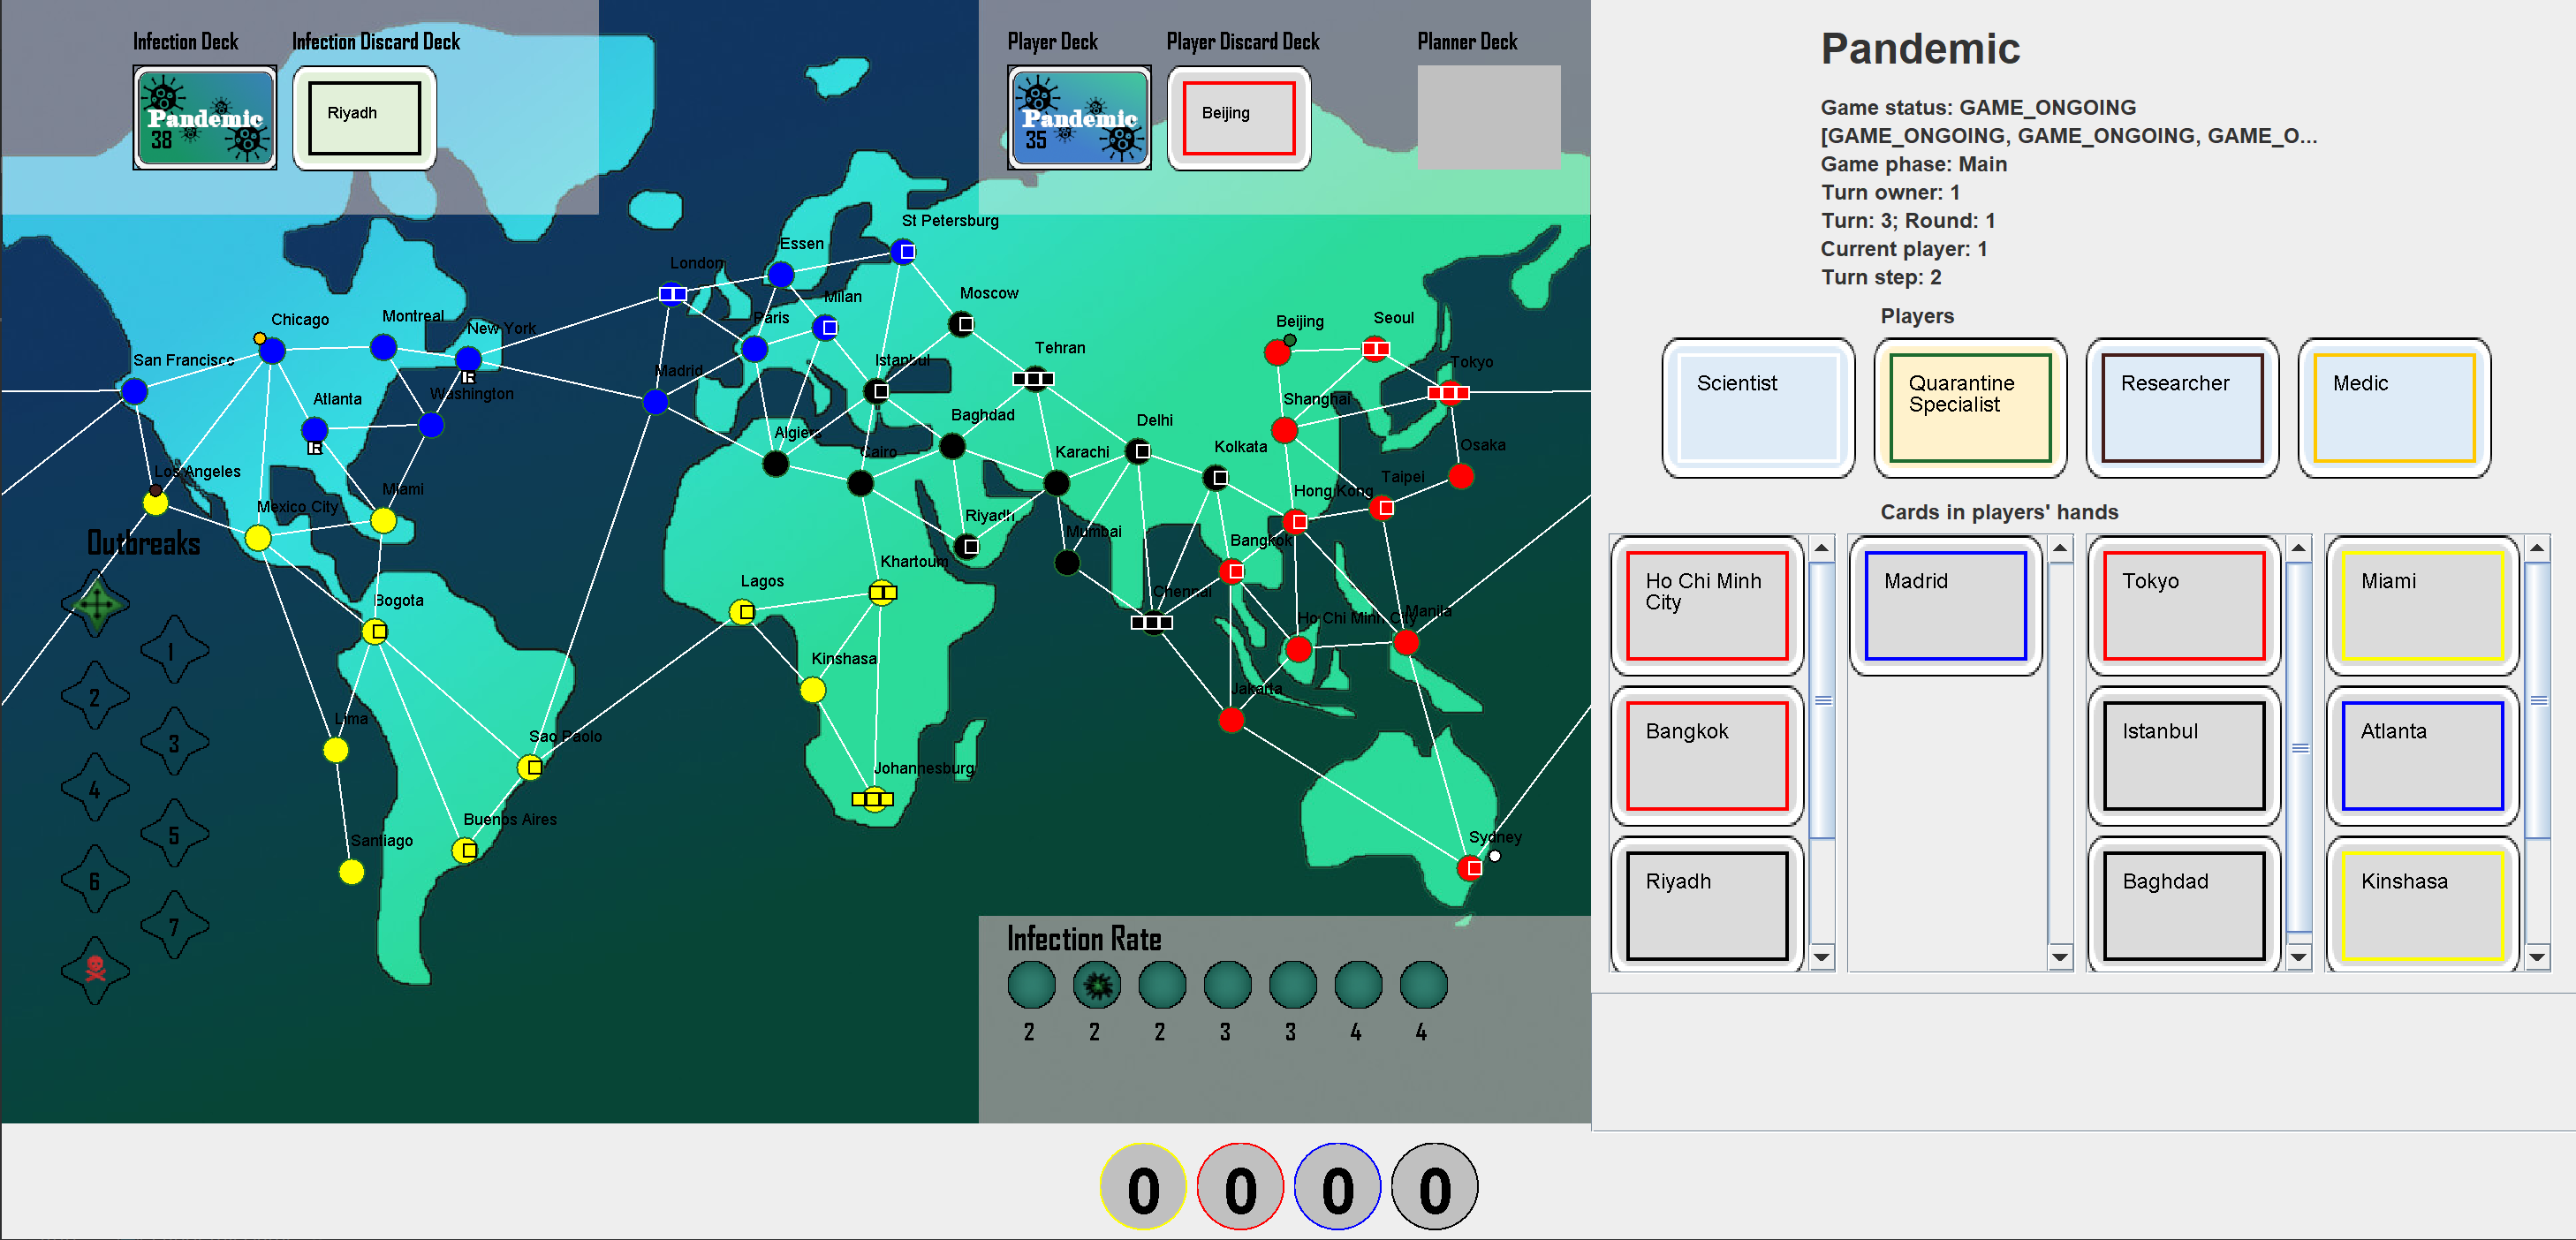 Pandemic Game Interface in TAG